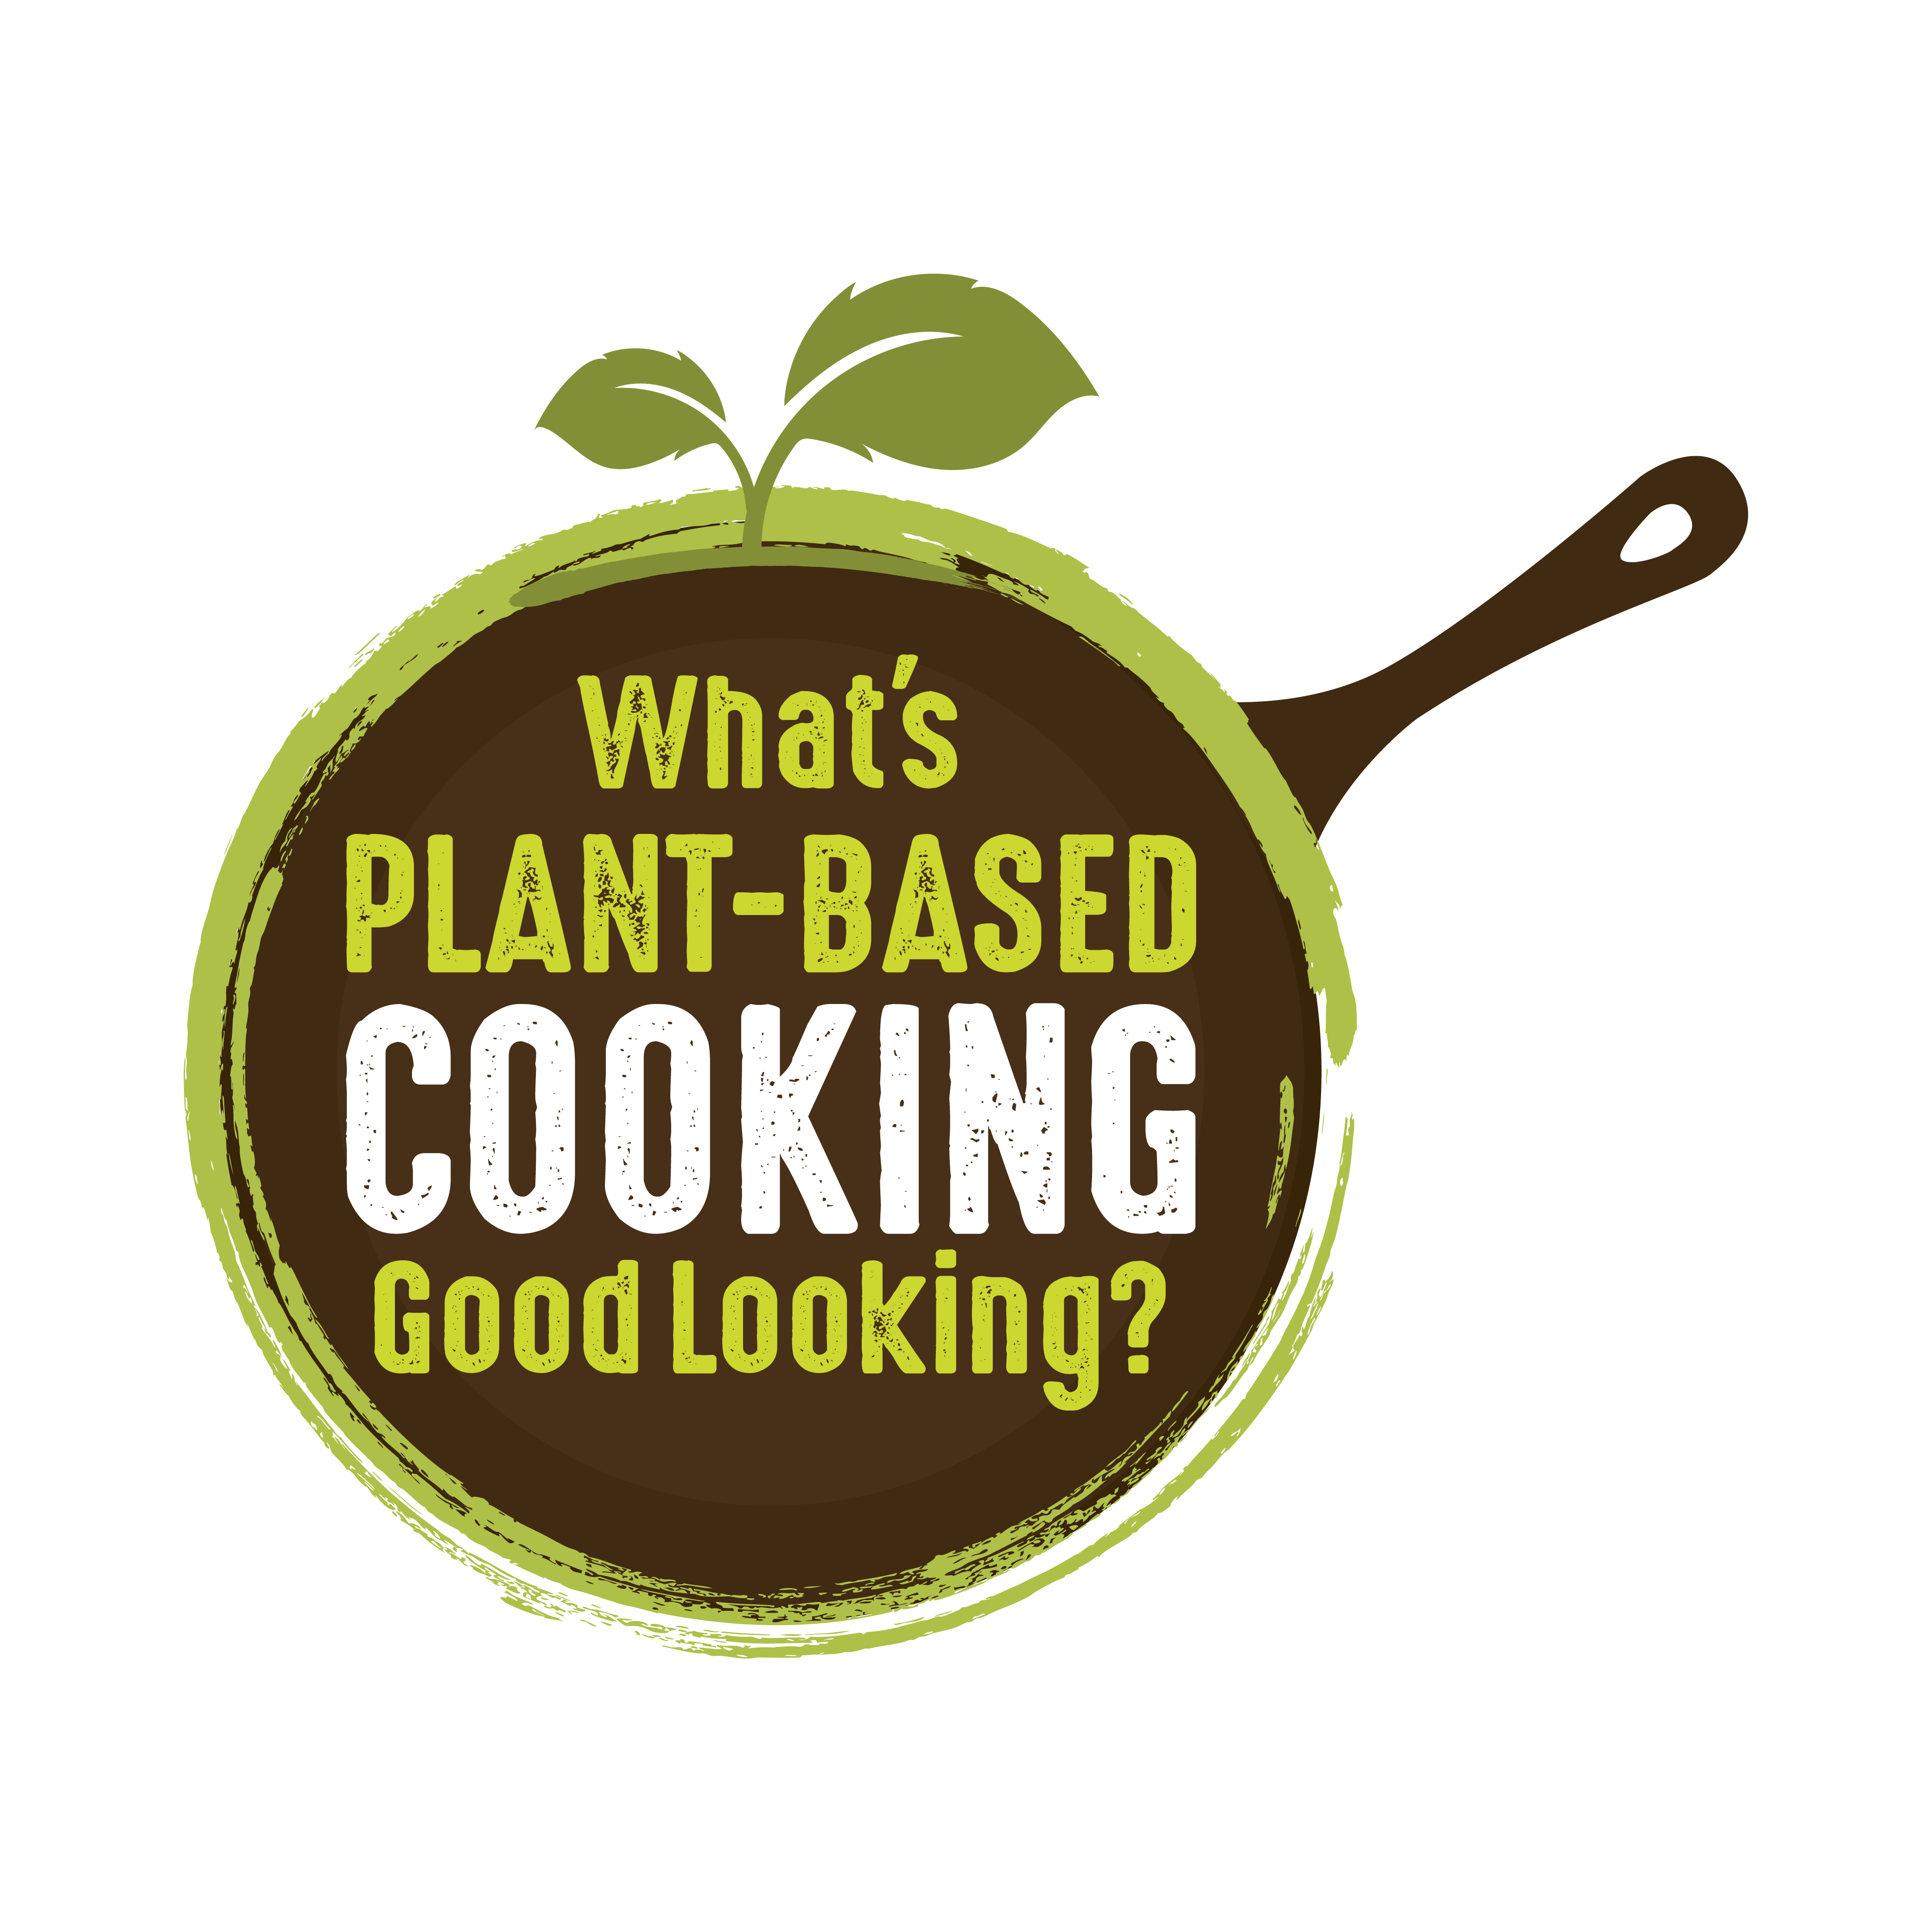 What's Plant-Based Cooking Good Looking?